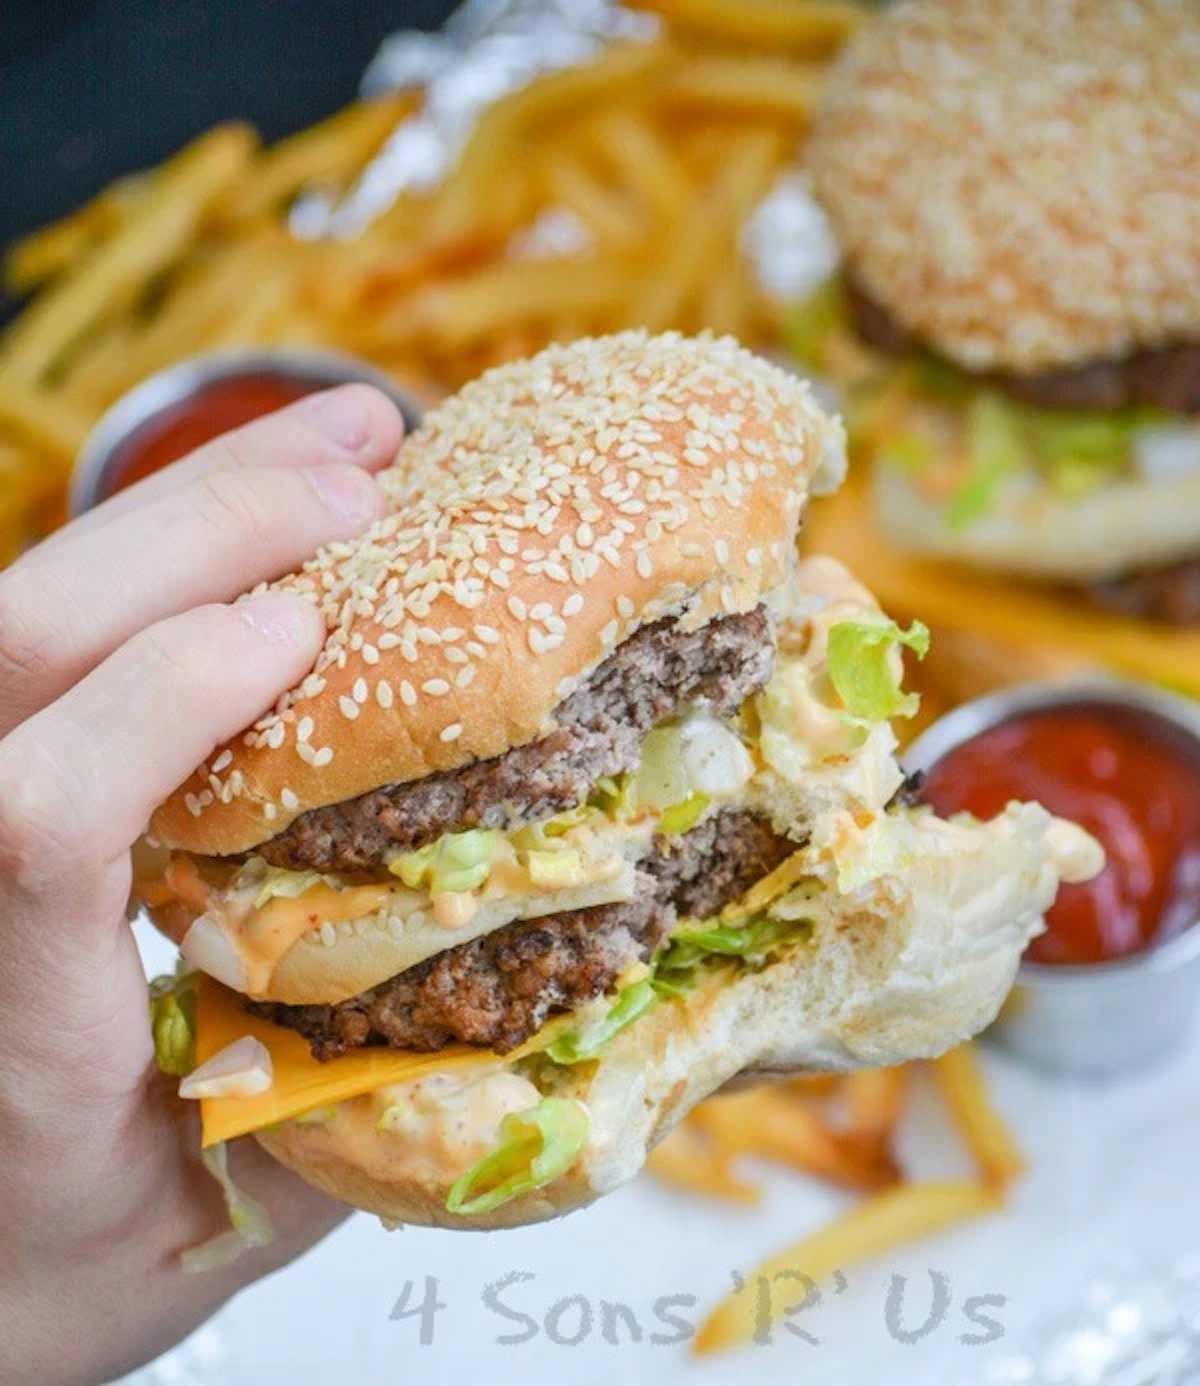 A hand holds up a homemade big mac that has a bite taken out of it.